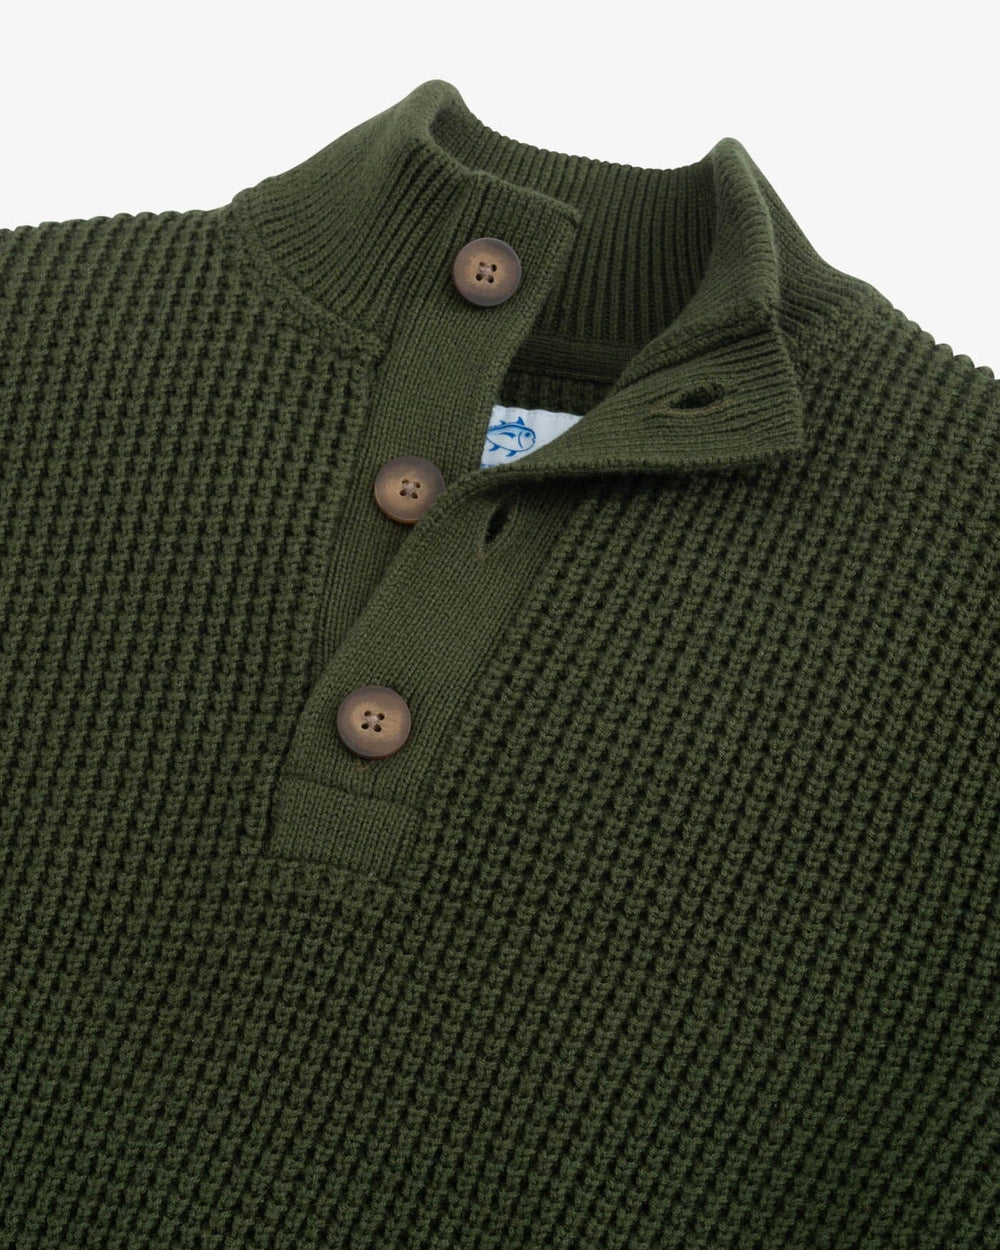 The detail view of the Southern Tide Westmont Heather Jade Quarter Zip Button by Southern Tide - Heather Gulf Green